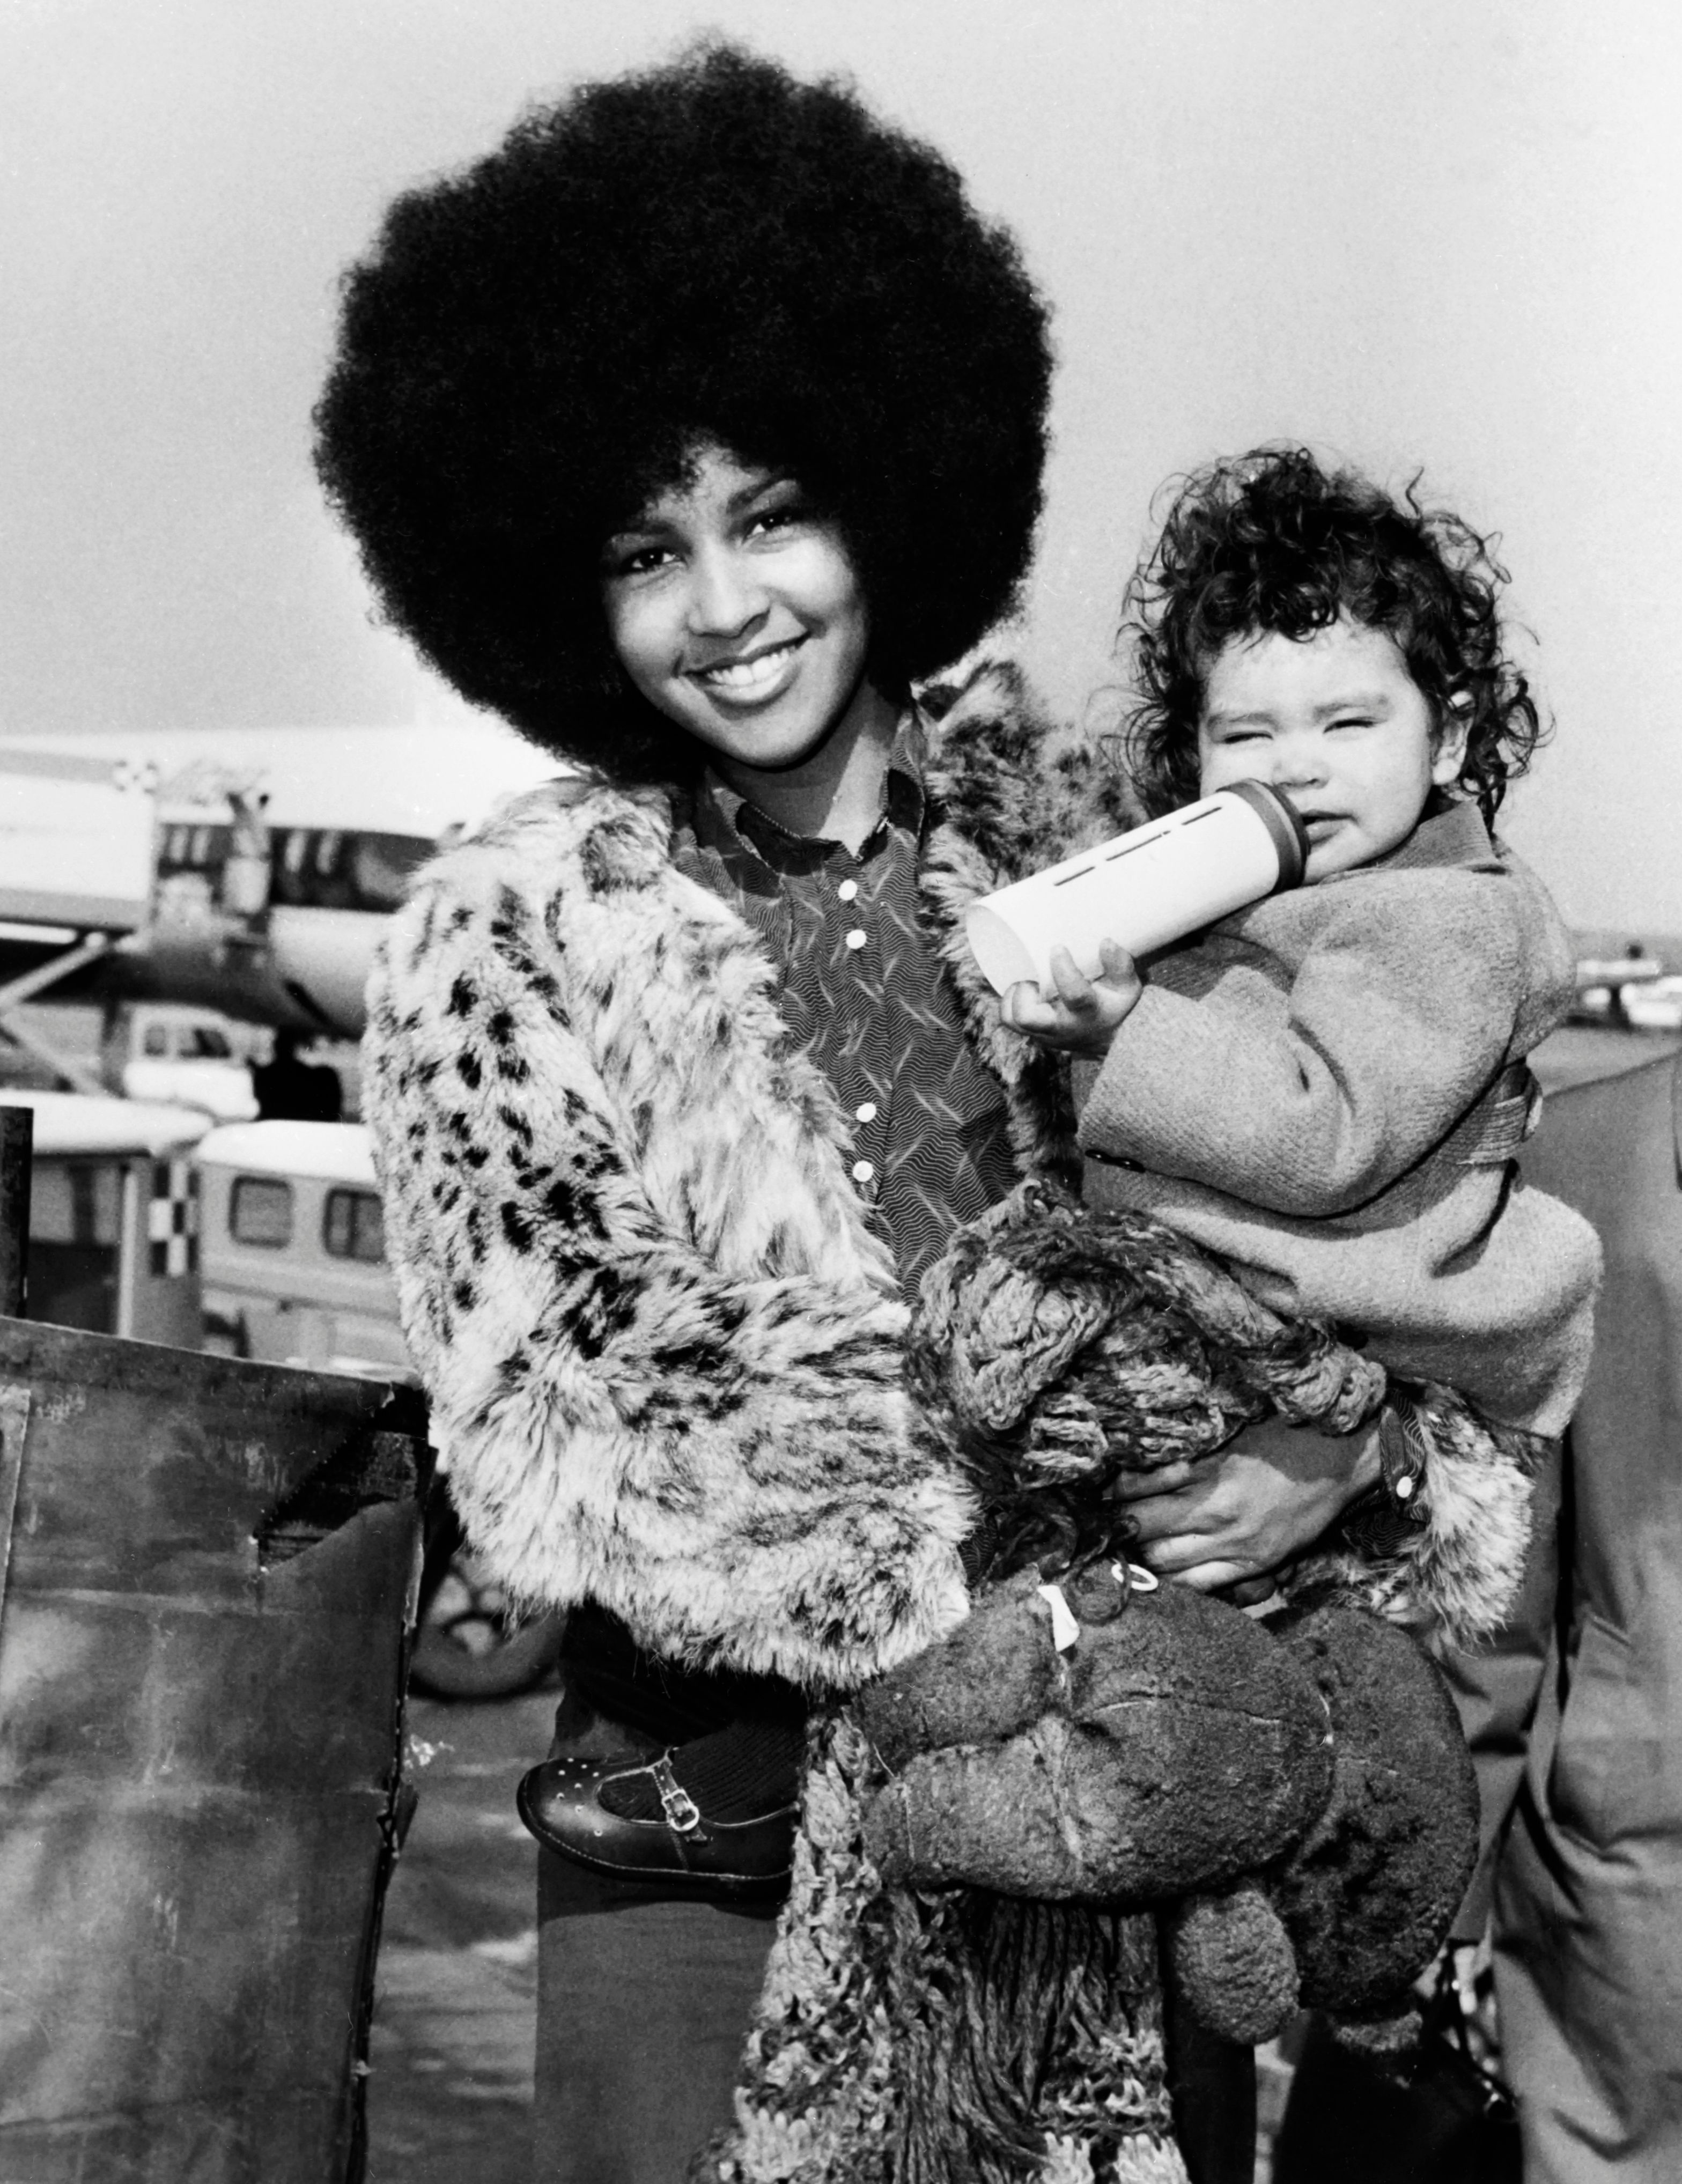 Former US model Marsha Hunt pictured with her daughter Karis on March 16, 1972 in Rome. / Source: Getty Images